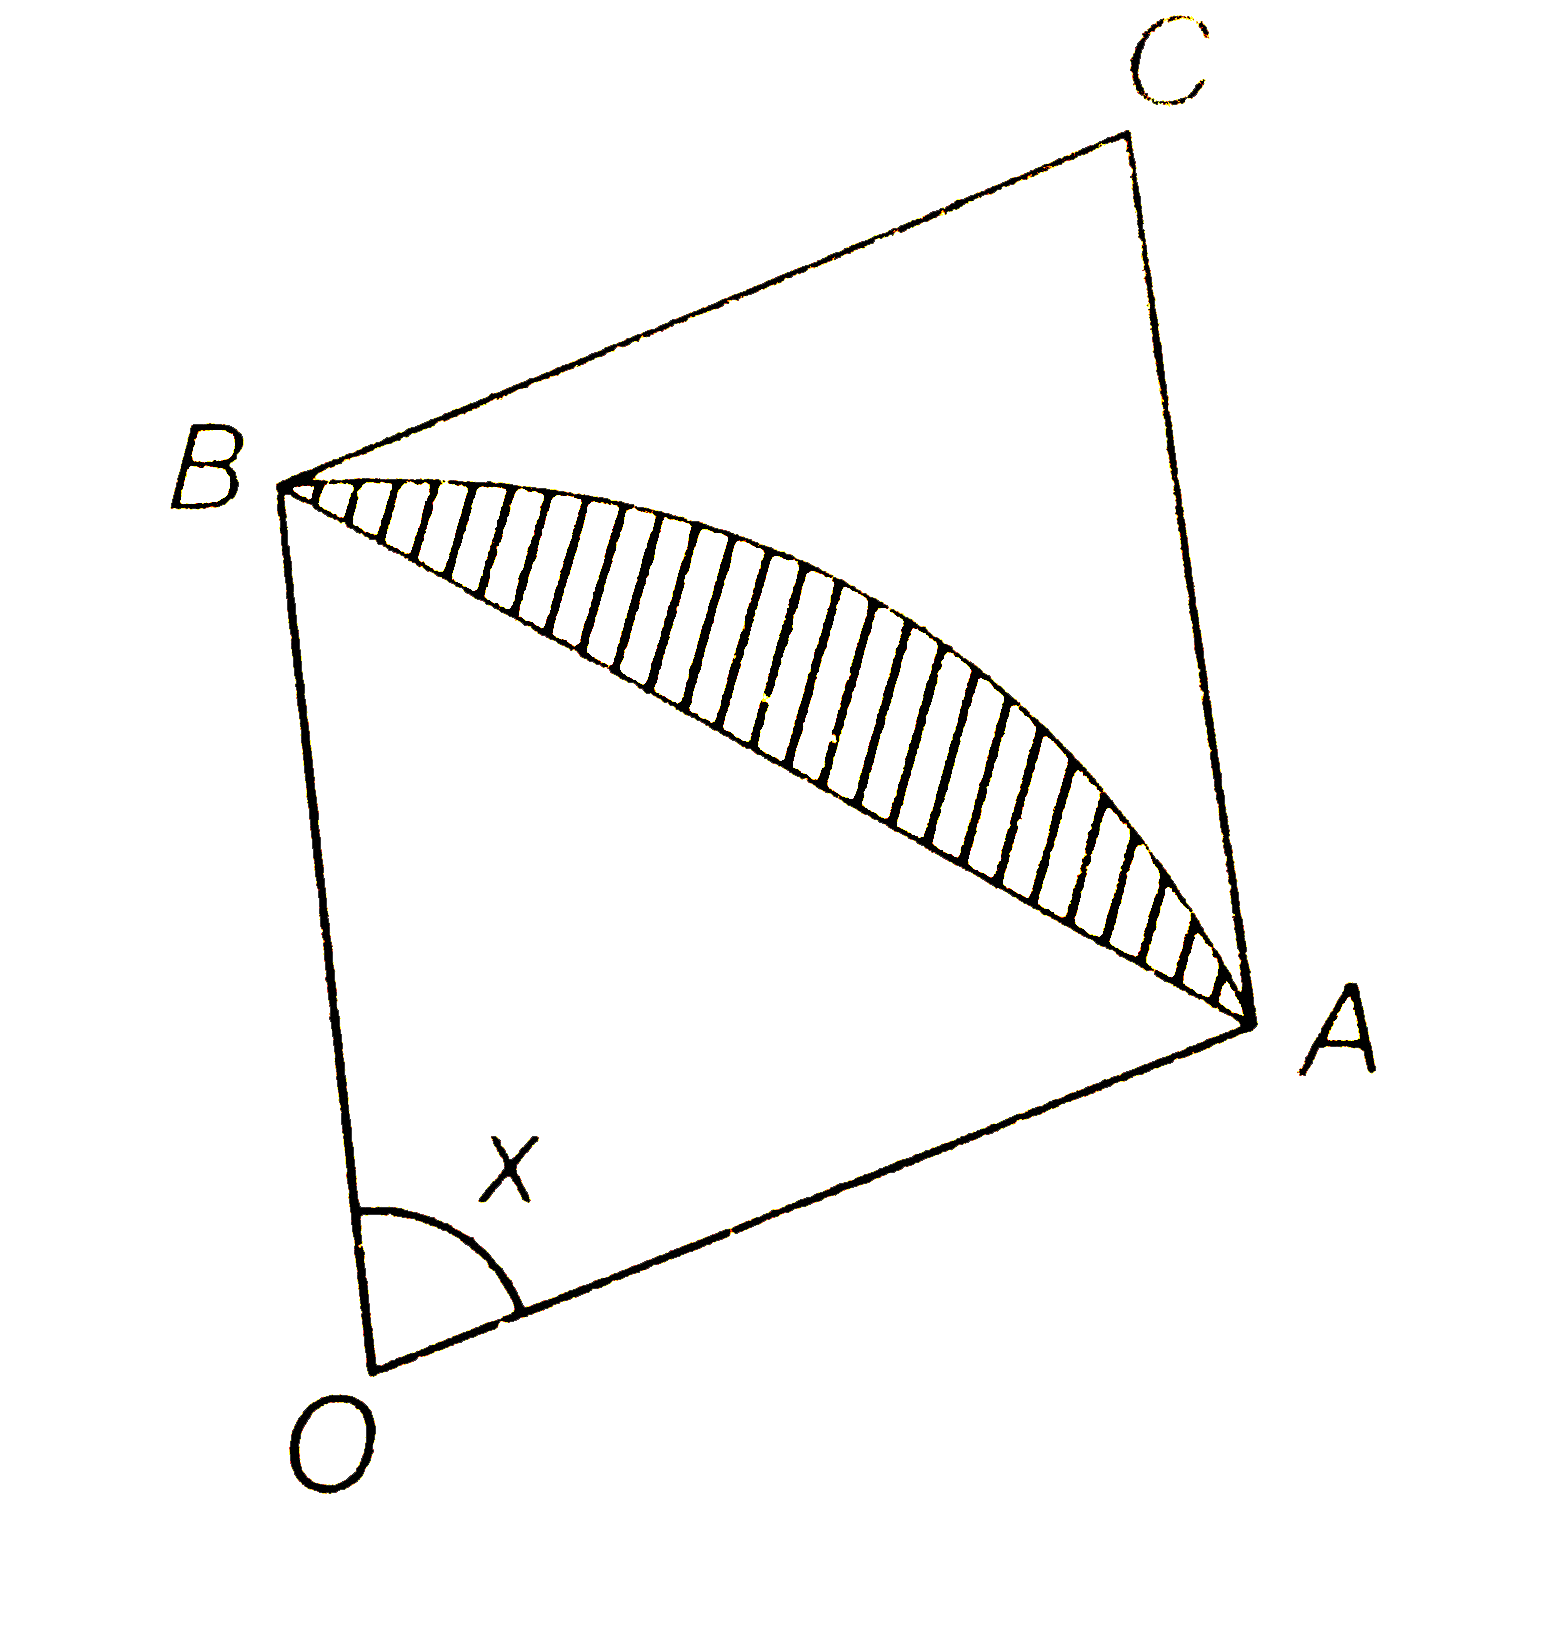 A circle arc of radius 1 subtends an angle of x radians as shown in figure. The centre of the circle is O and the point C is the intersection of two tangent lines at A and B. Let T(x) be the area of DeltaABC and S(x) be the area of shaded region.      lim(xto0)(T(x))/(x^(3)) is